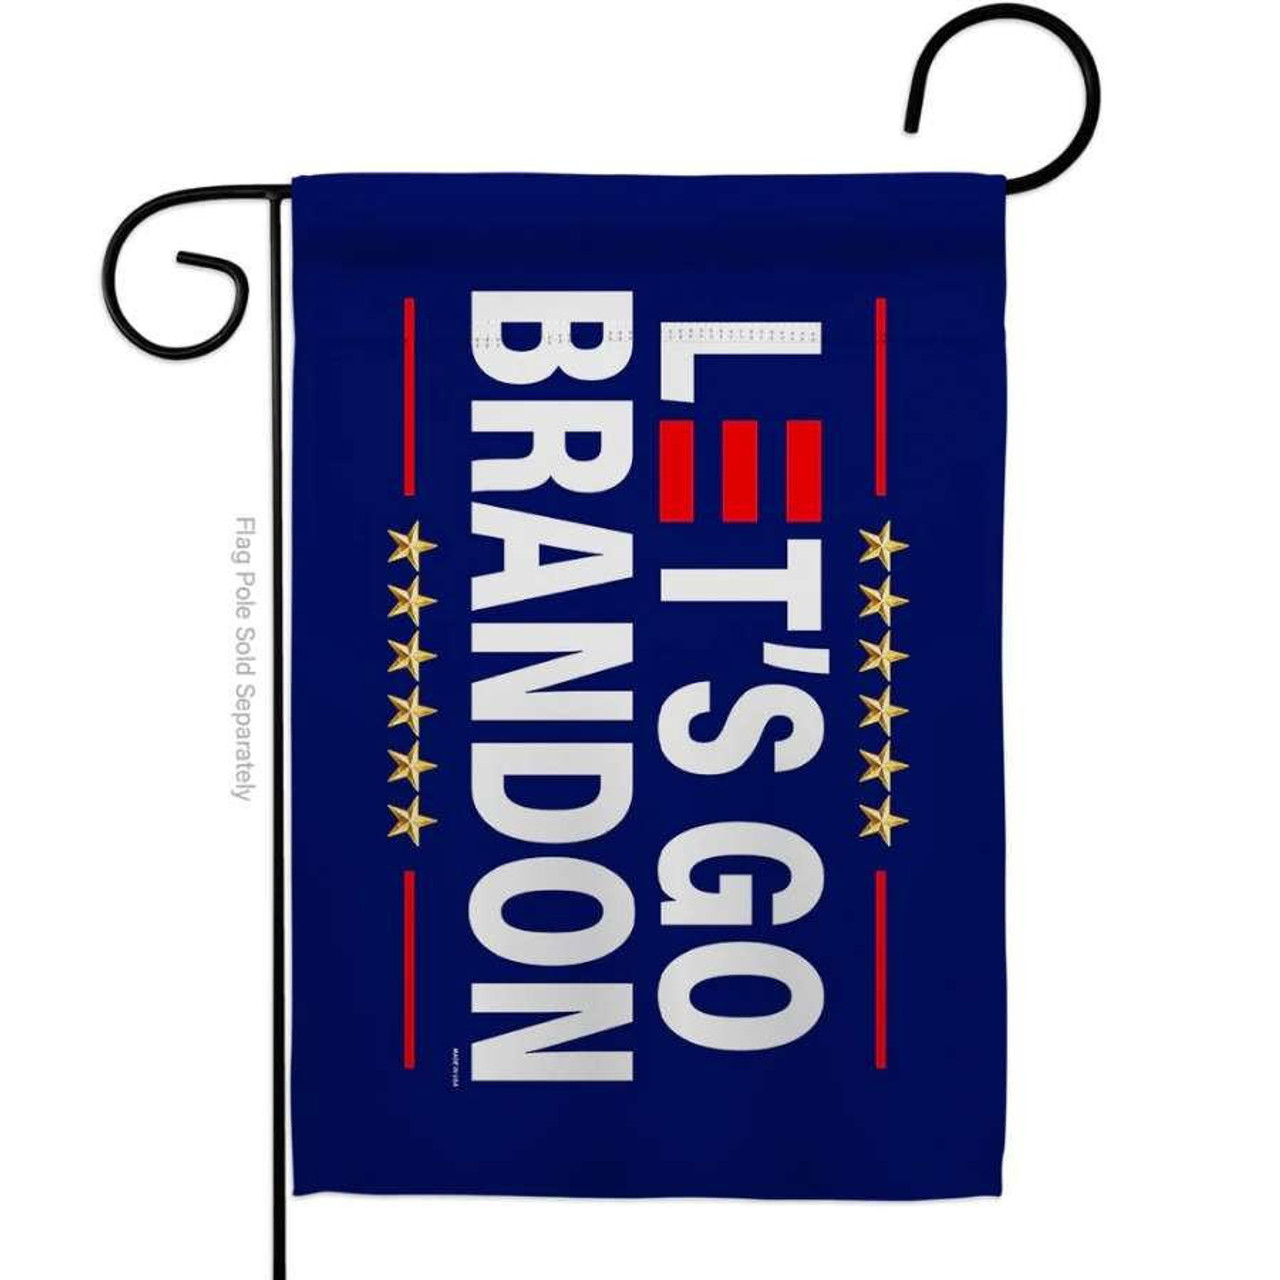 A navy garden flag with vertically aligned white text reading "Let's Go Brandon" paired with red accents and yellow stars.